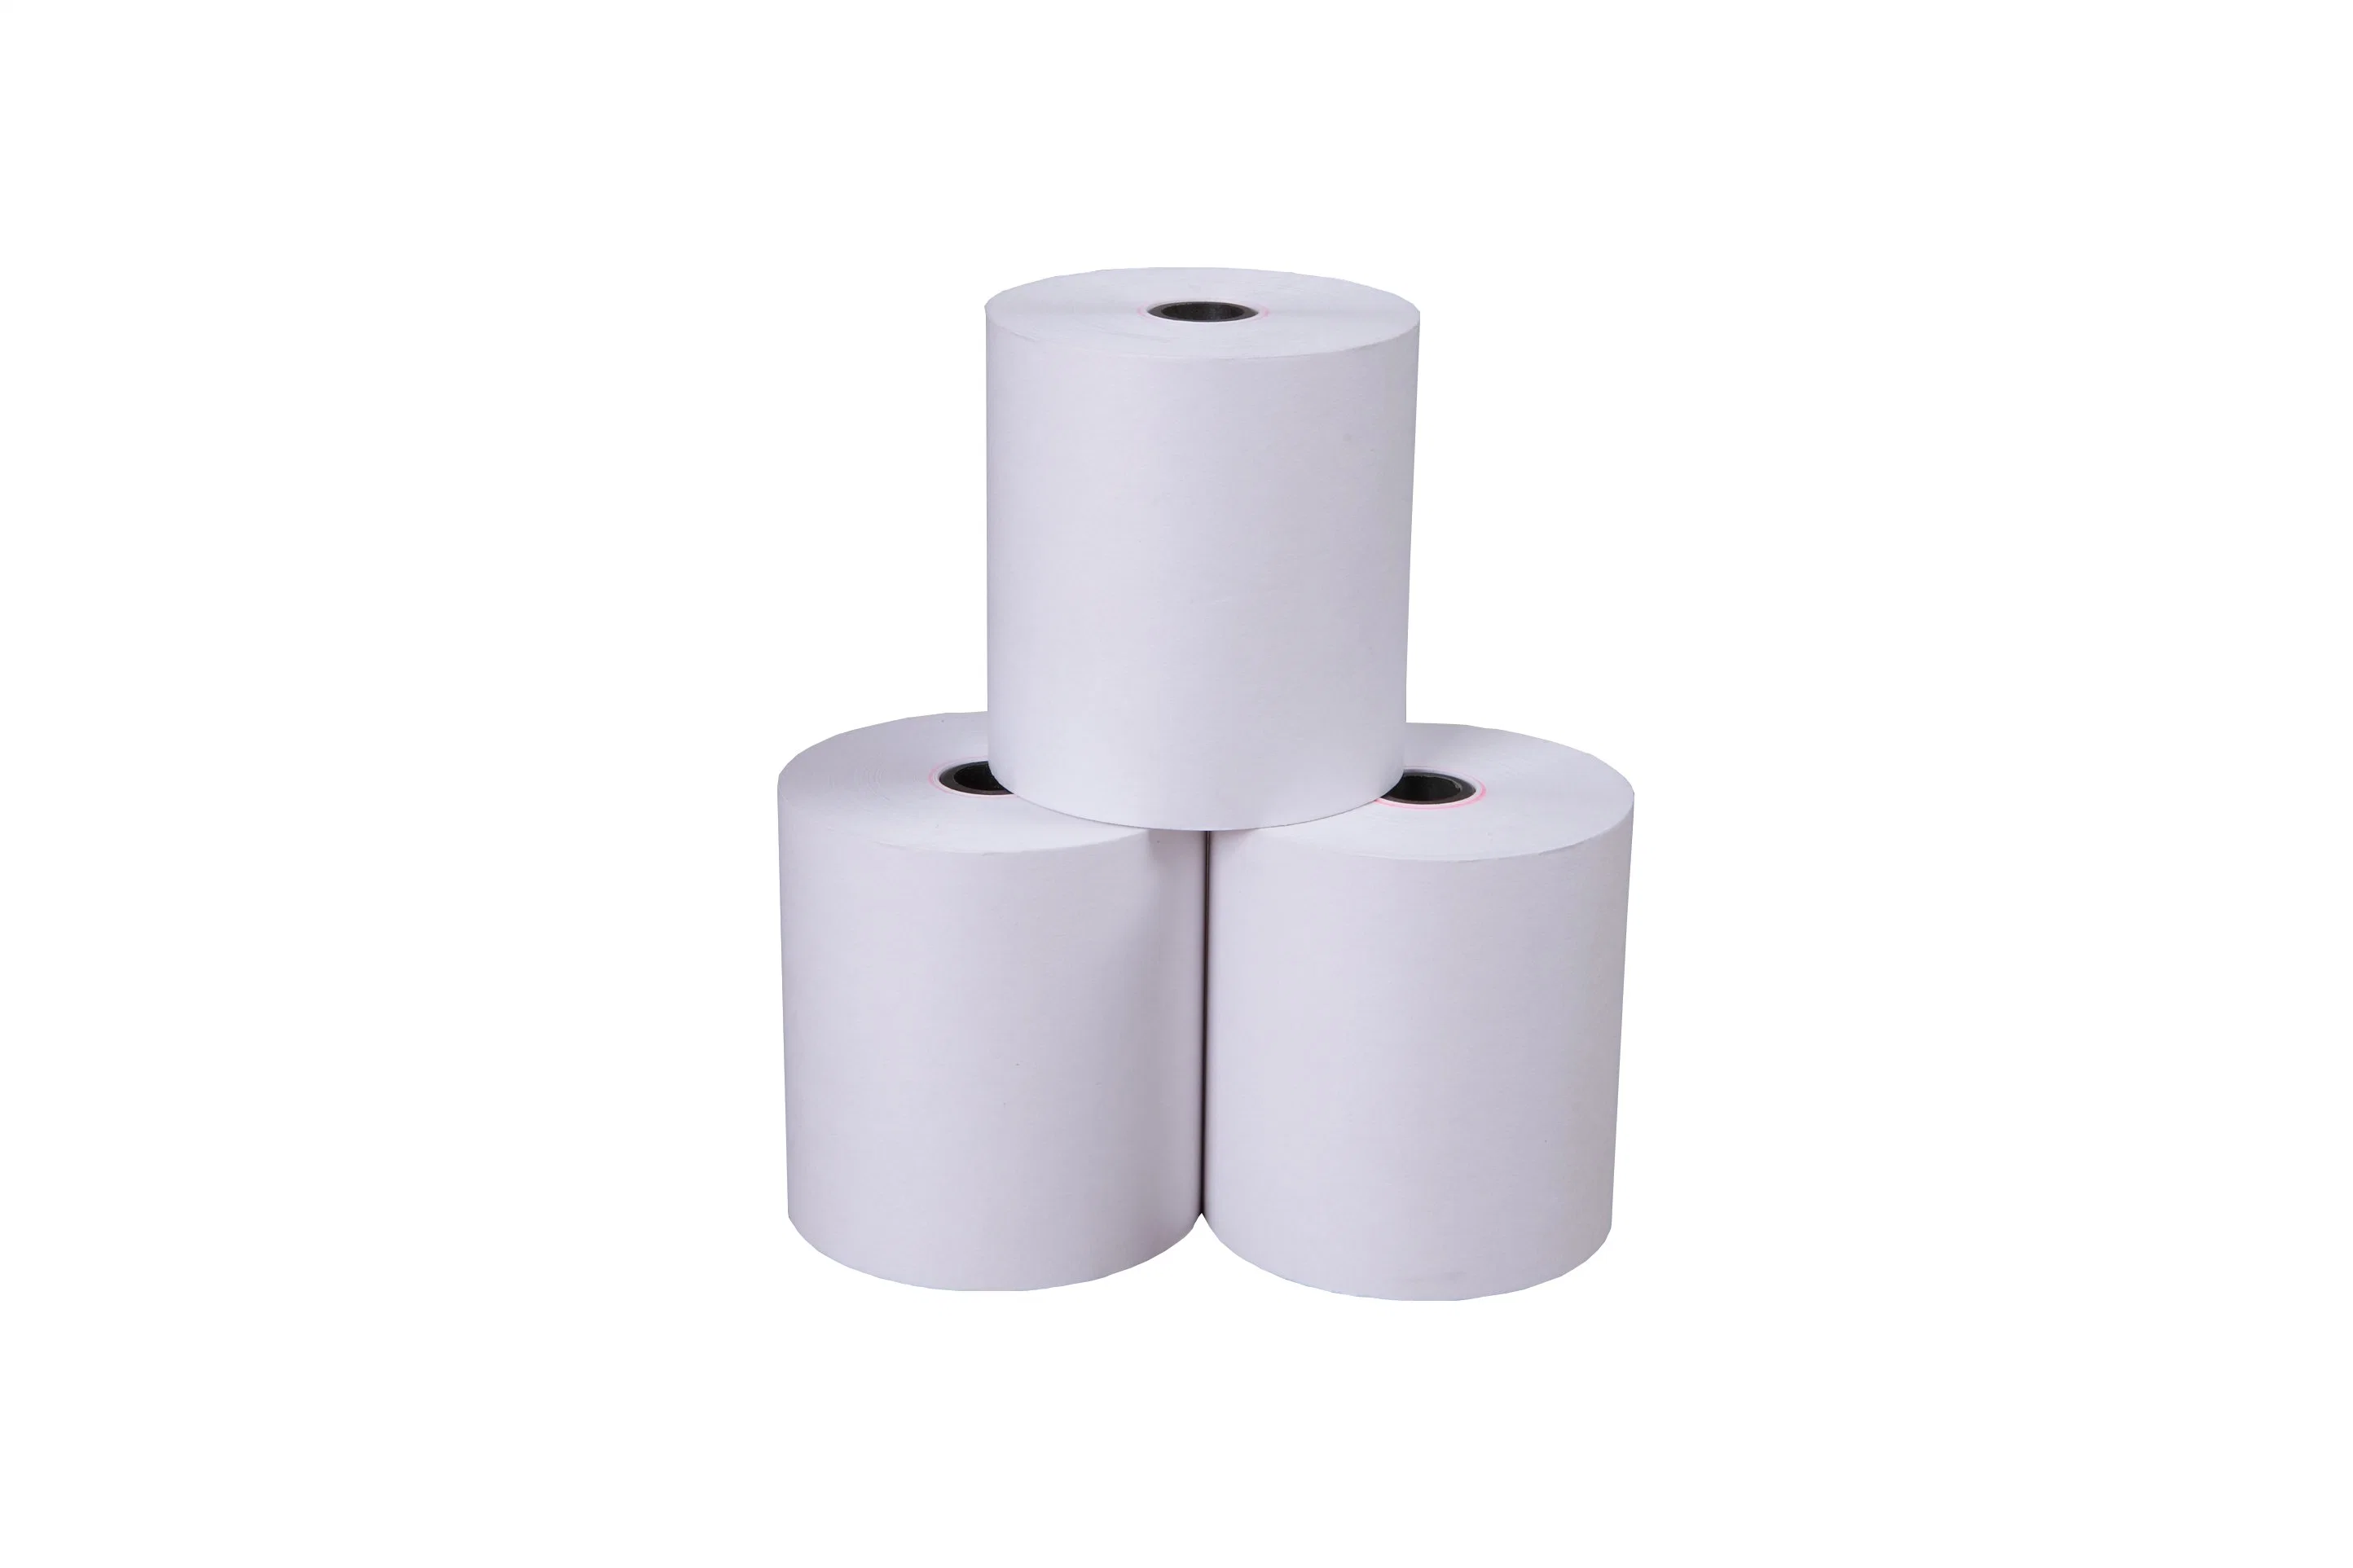 TPW-76-102-32 Reliable online shop where to buy thermal receipt paper